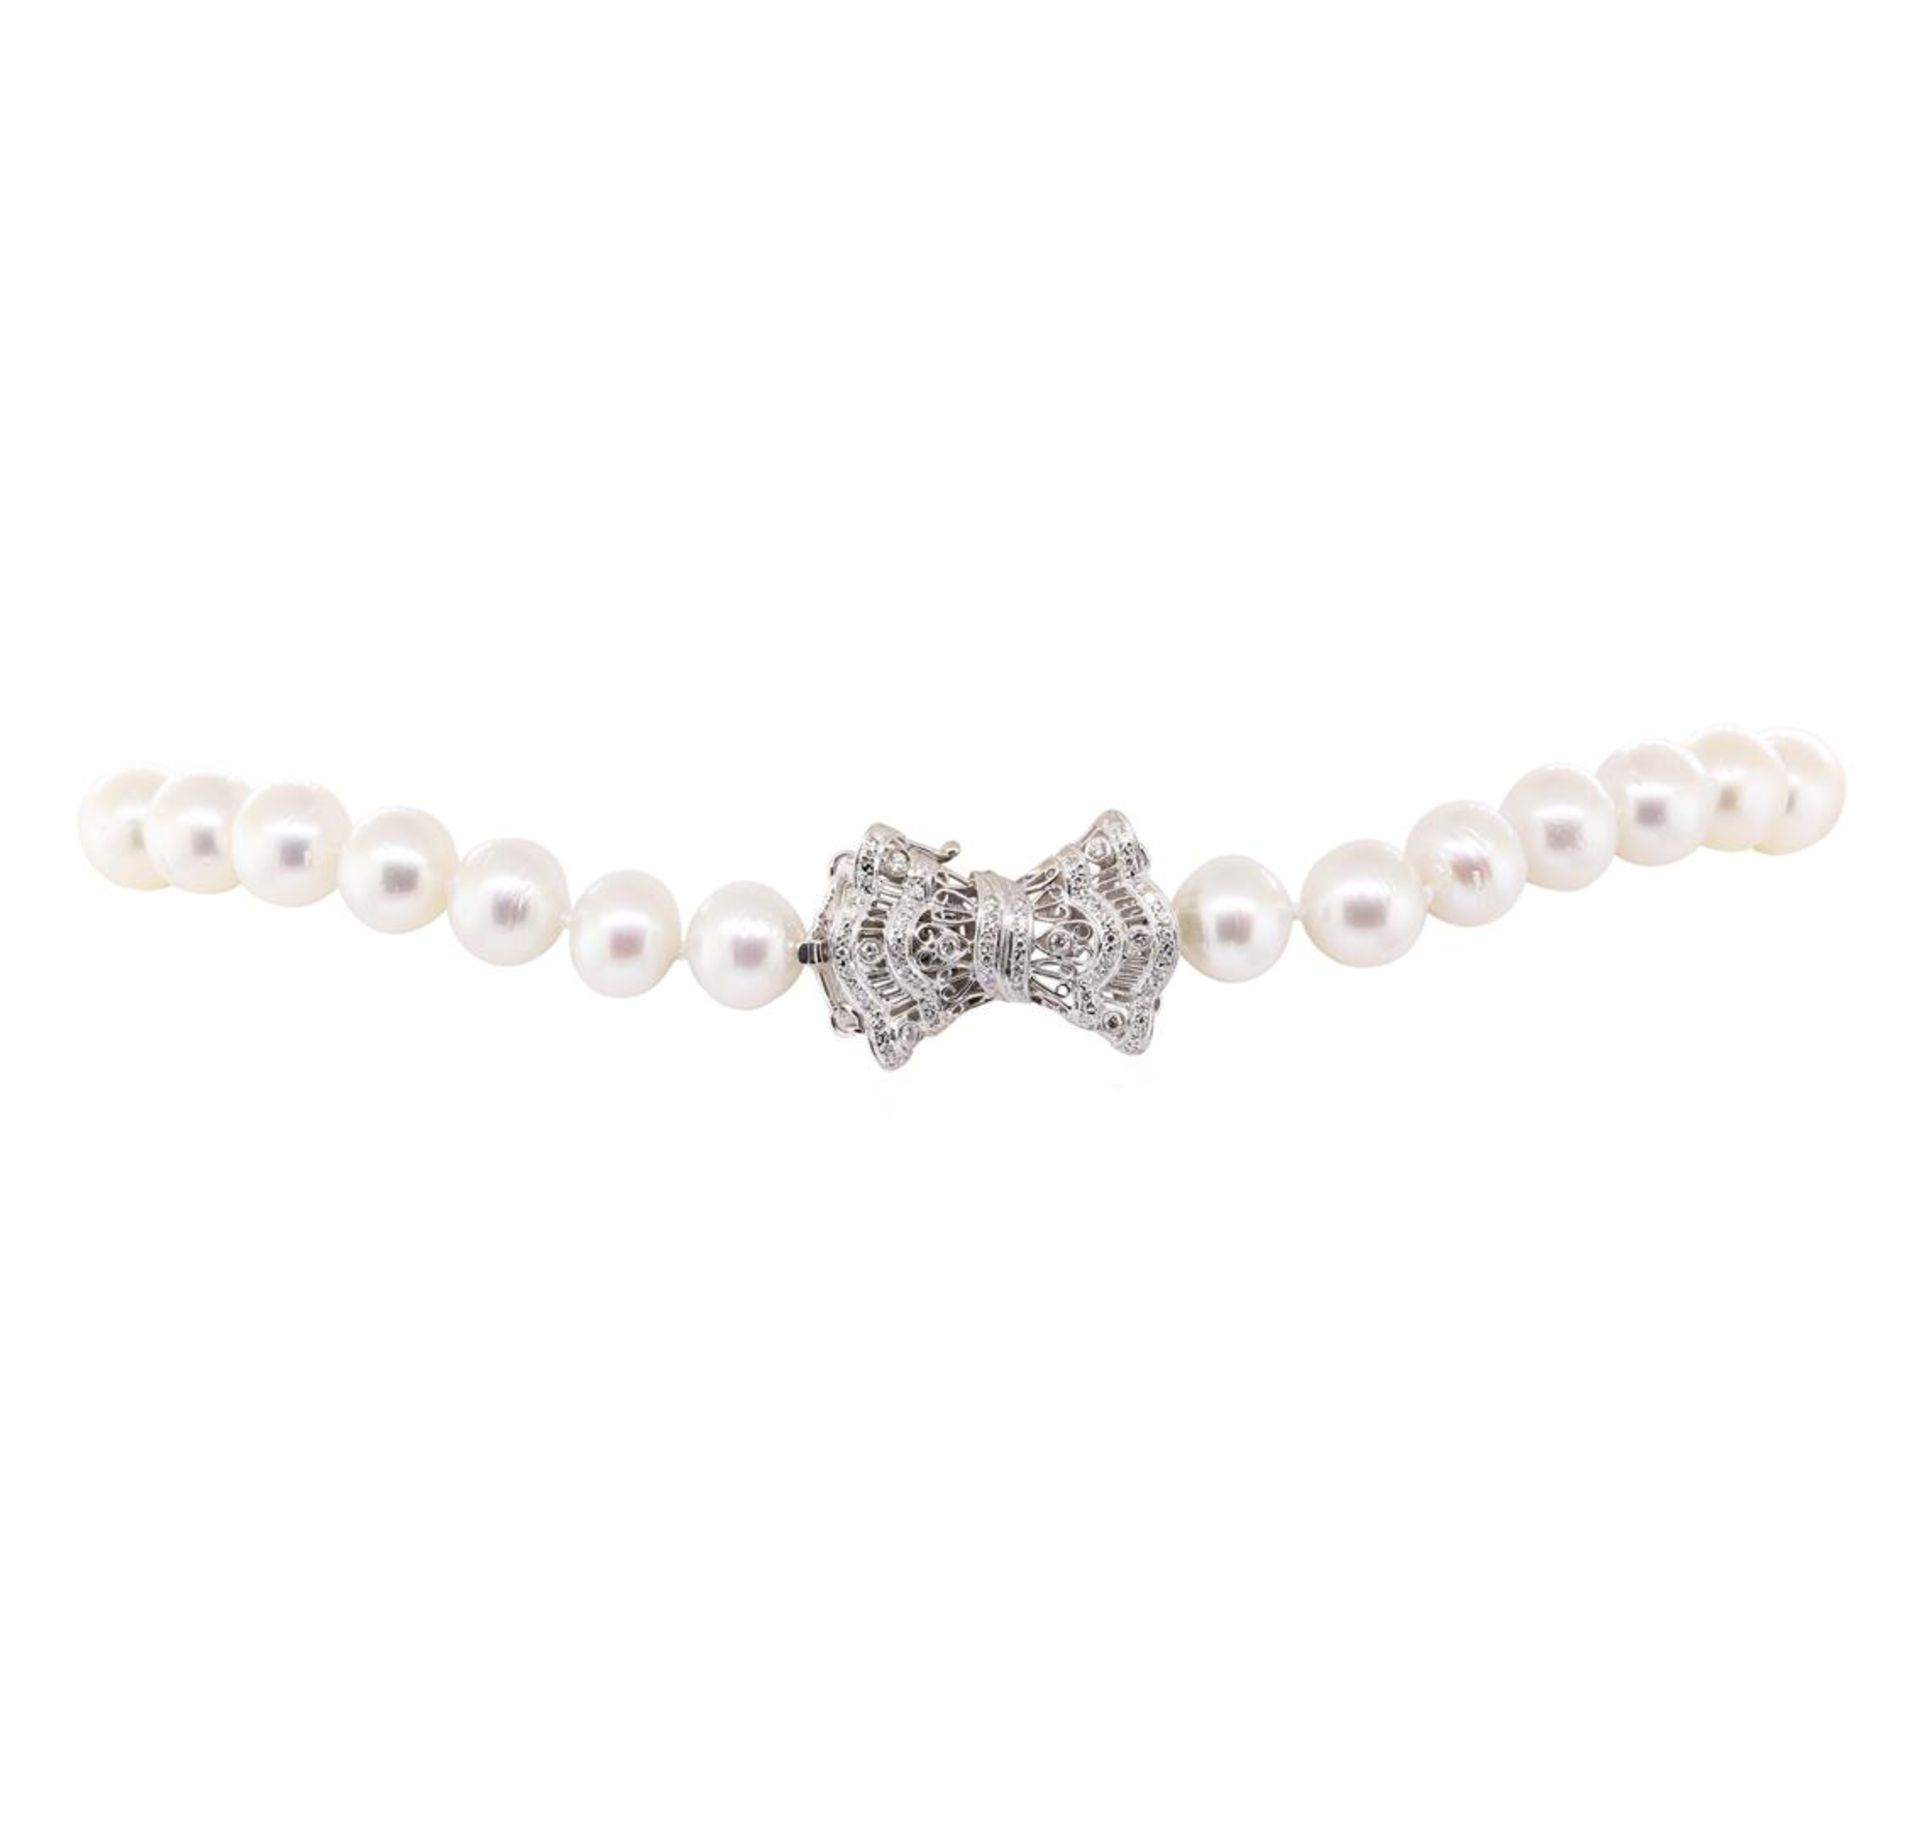 0.78 ctw Diamond and South Sea Pearl Necklace - 14KT White Gold - Image 3 of 4